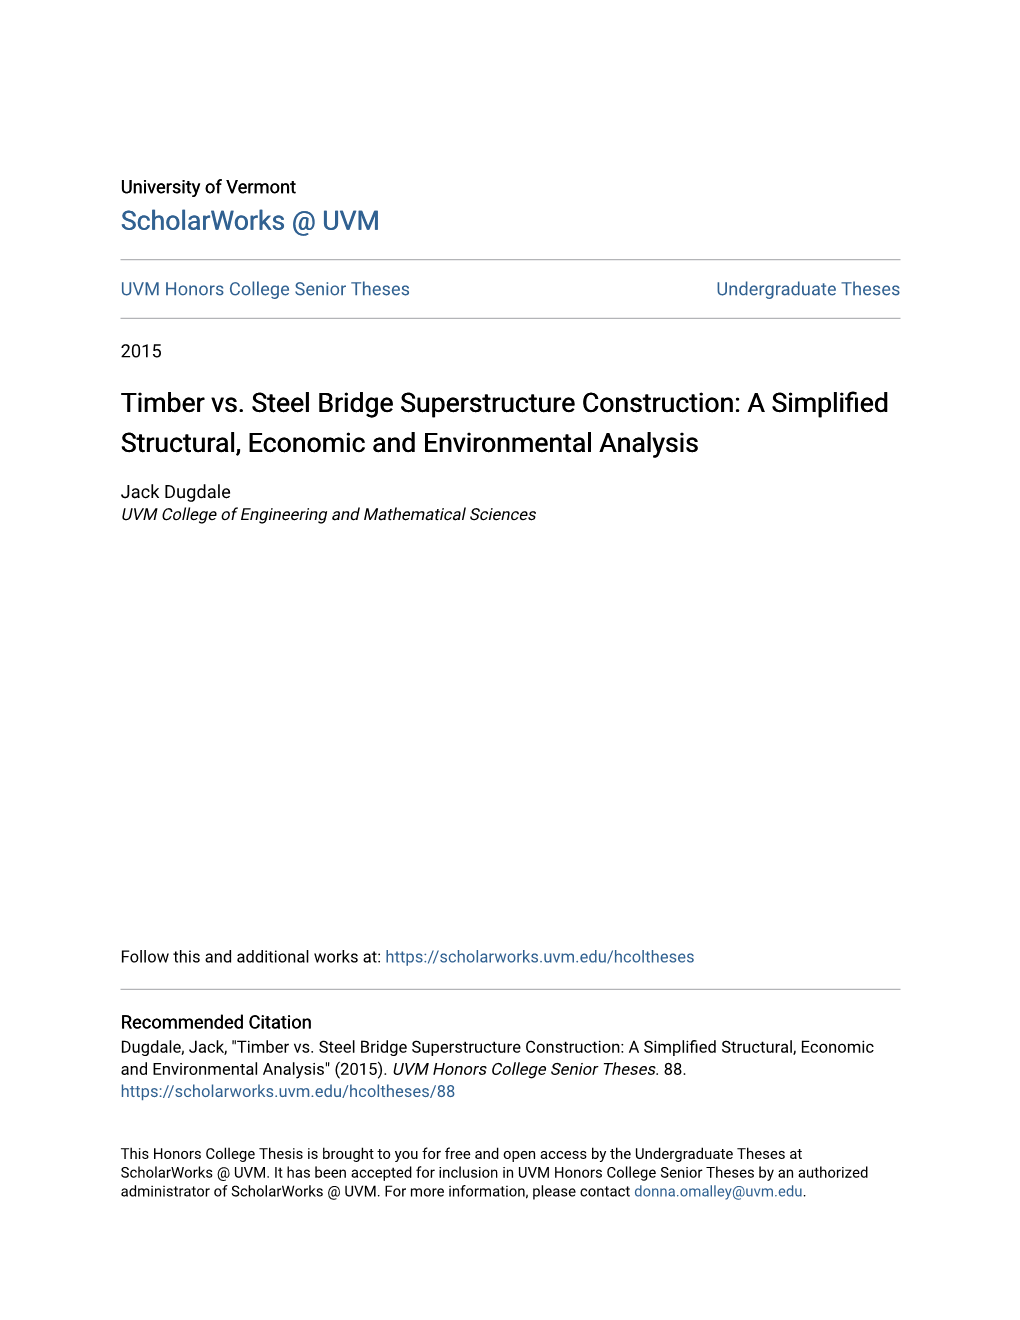 Timber Vs. Steel Bridge Superstructure Construction: a Simplified Structural, Economic and Environmental Analysis